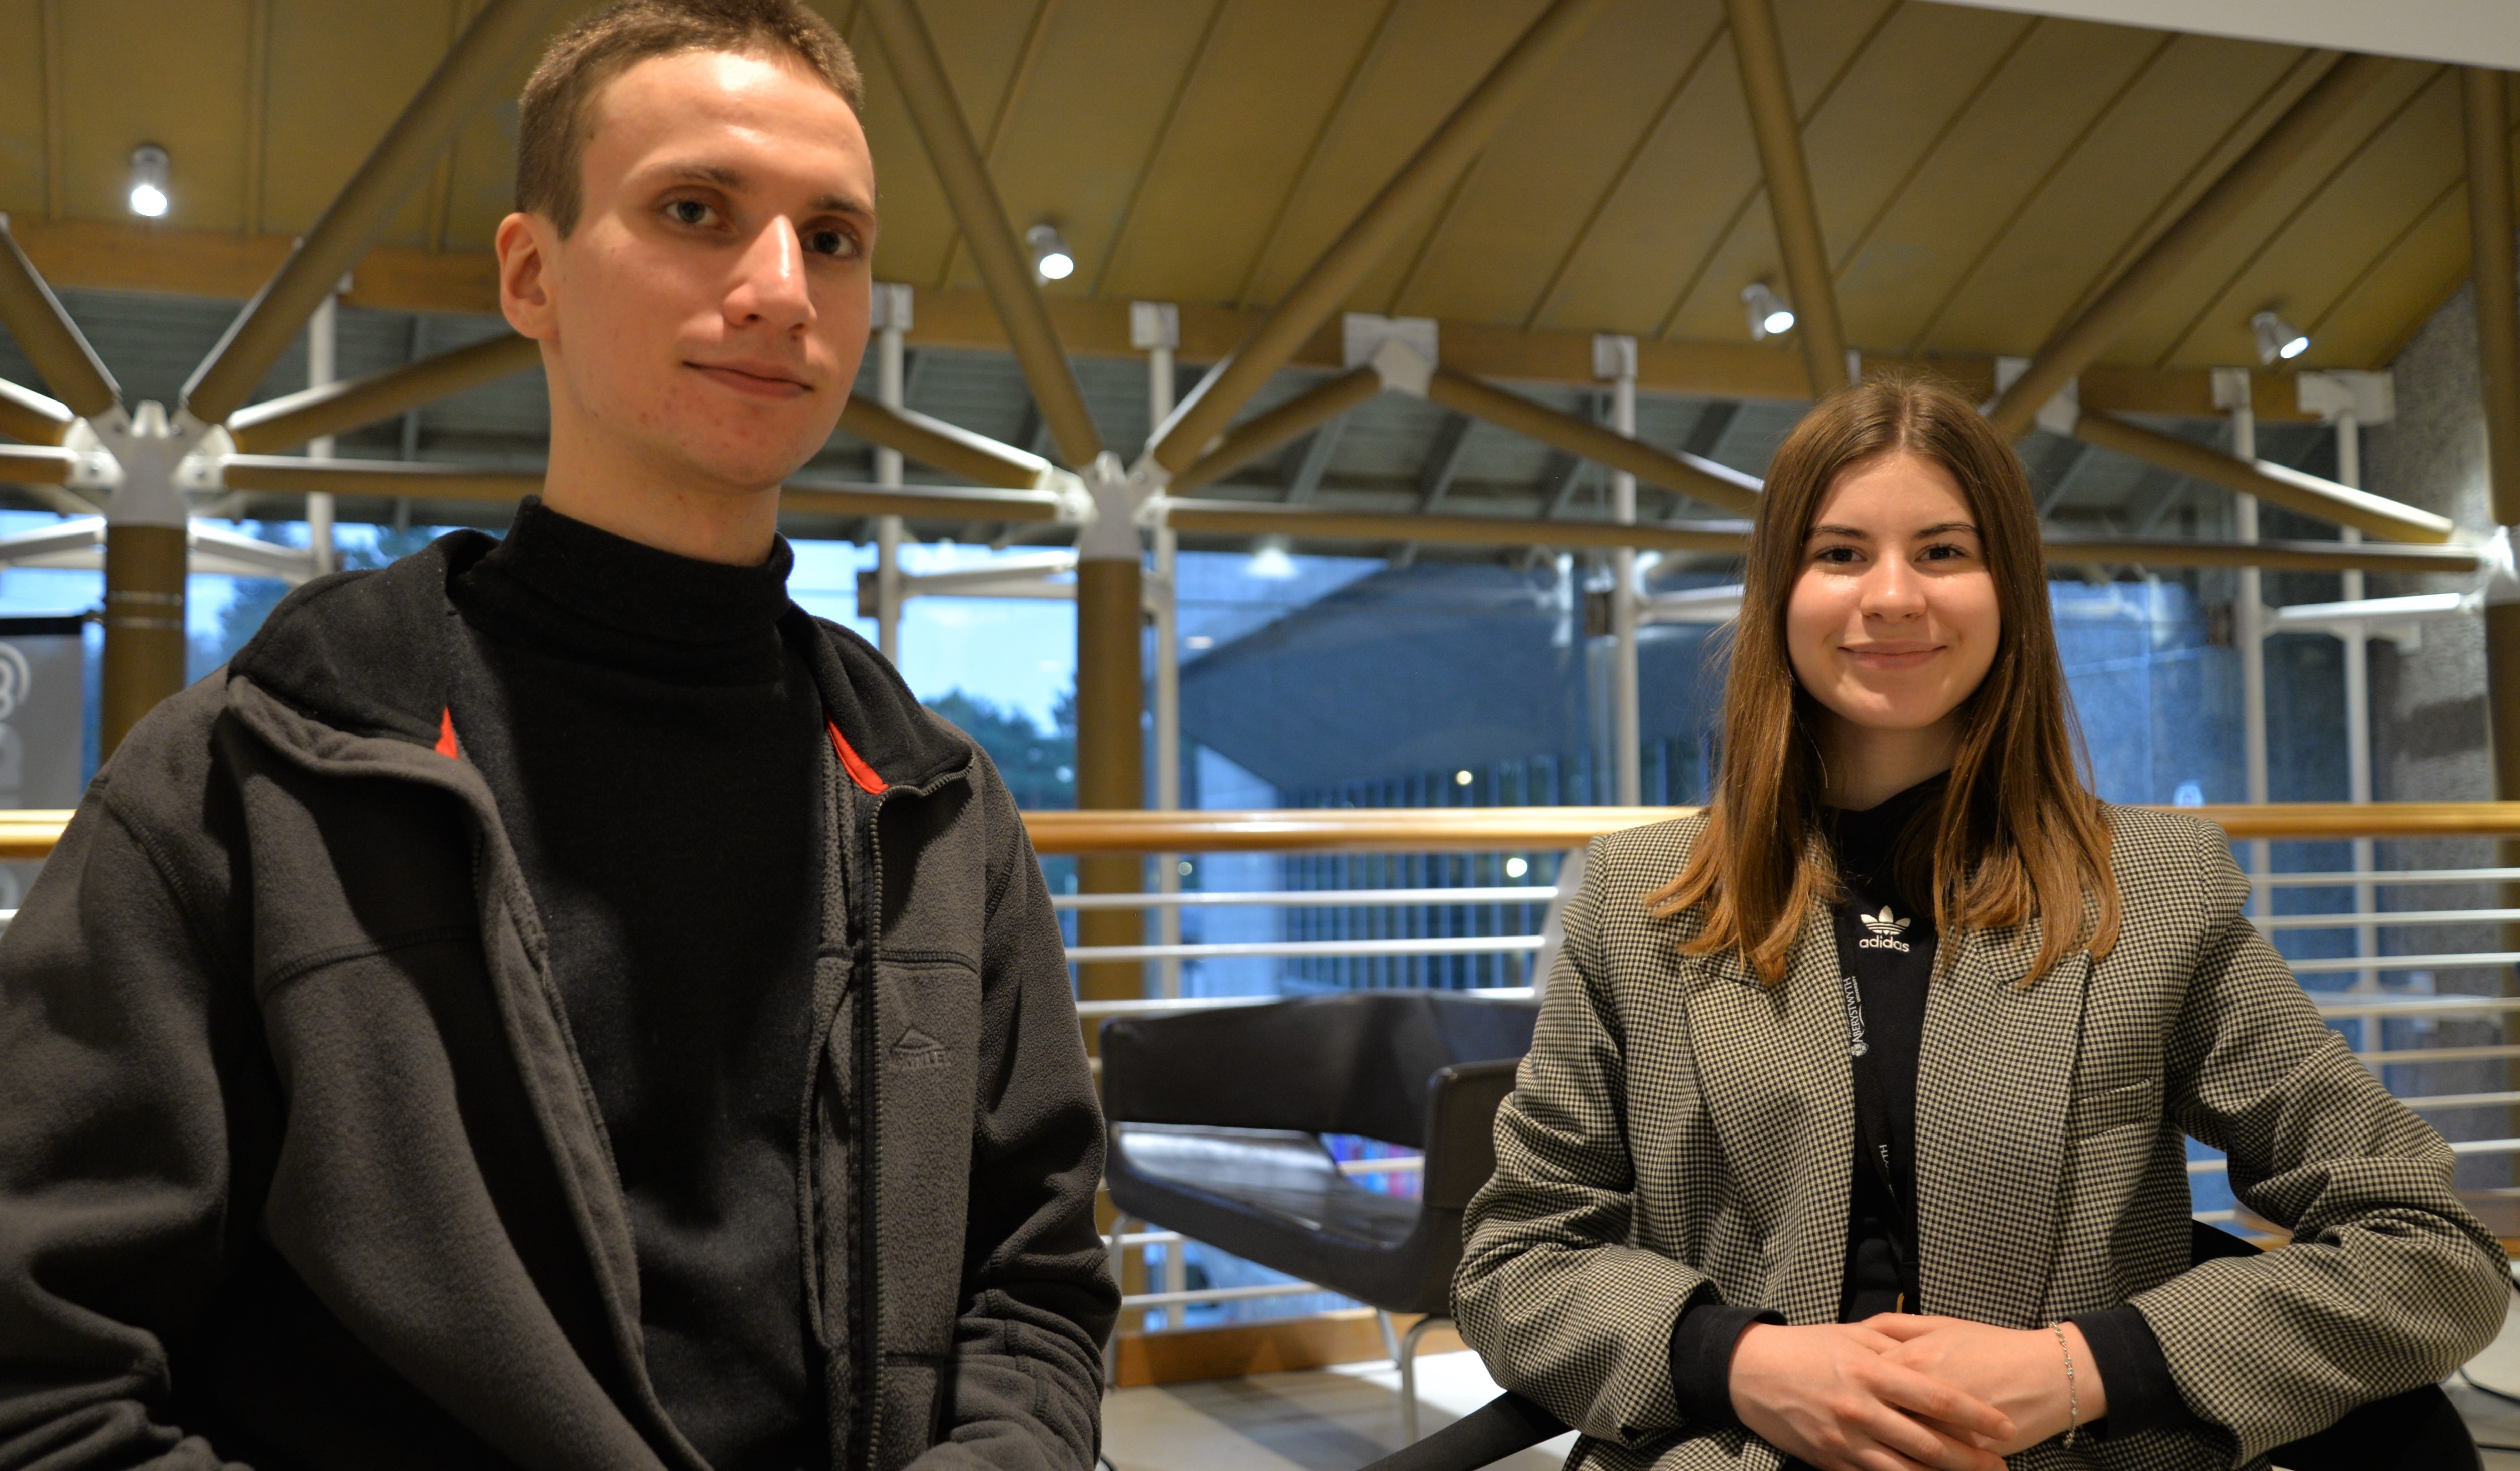 Oleksii Gorbatenko and Maryna Zaitseva who are currently studying at Aberystwyth Business School as part of a twinning arrangement with Odesa National Economic University in Ukraine.